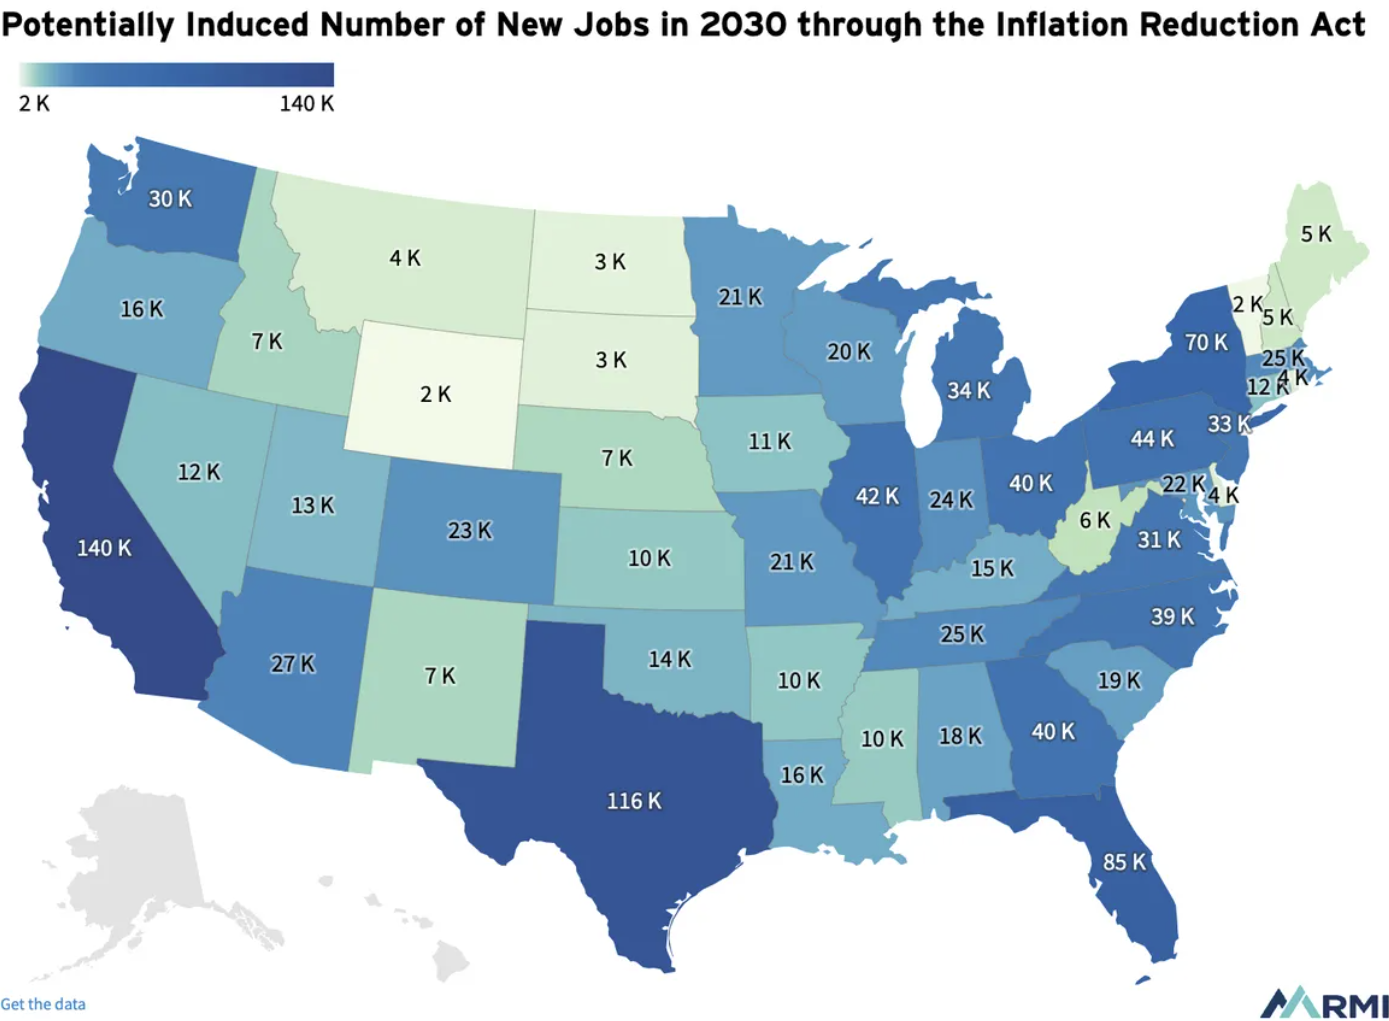 US map showing potentially induced number of new jobs in 2030 through the Inflation reduction act